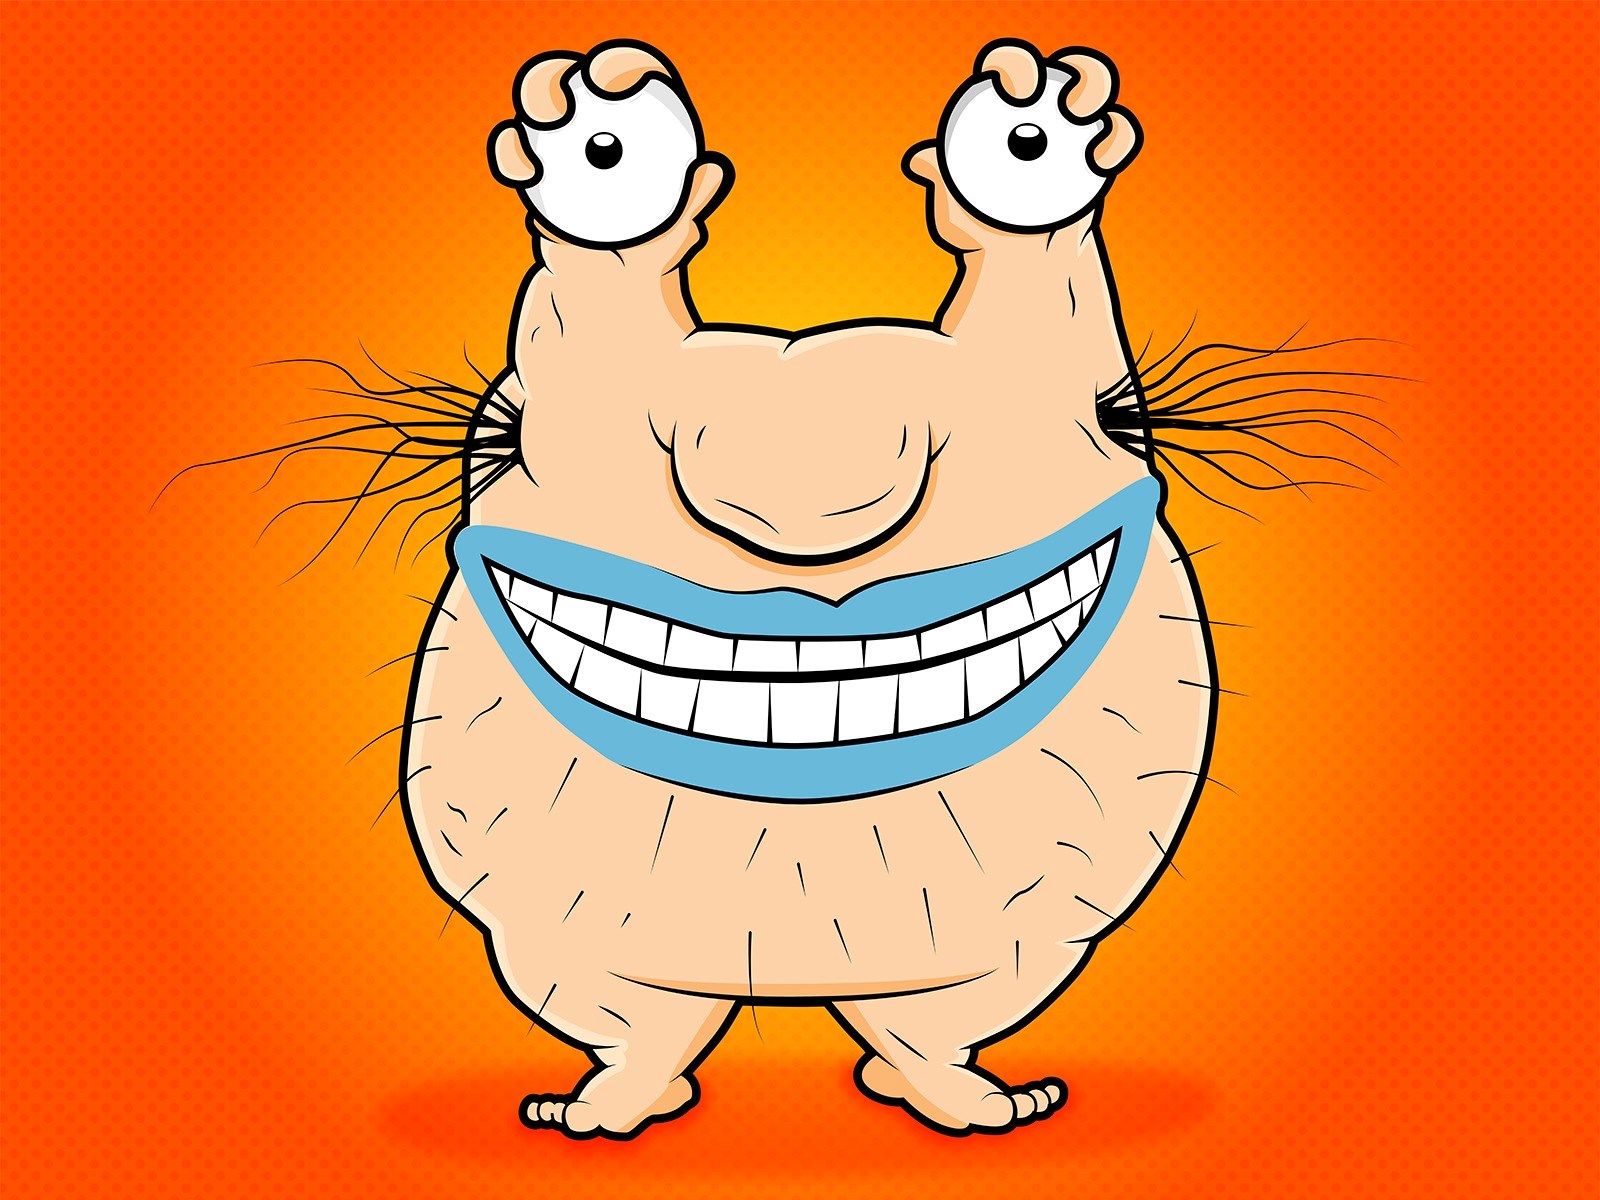 17-facts-about-krumm-aaahh-real-monsters-1694507113.jpg